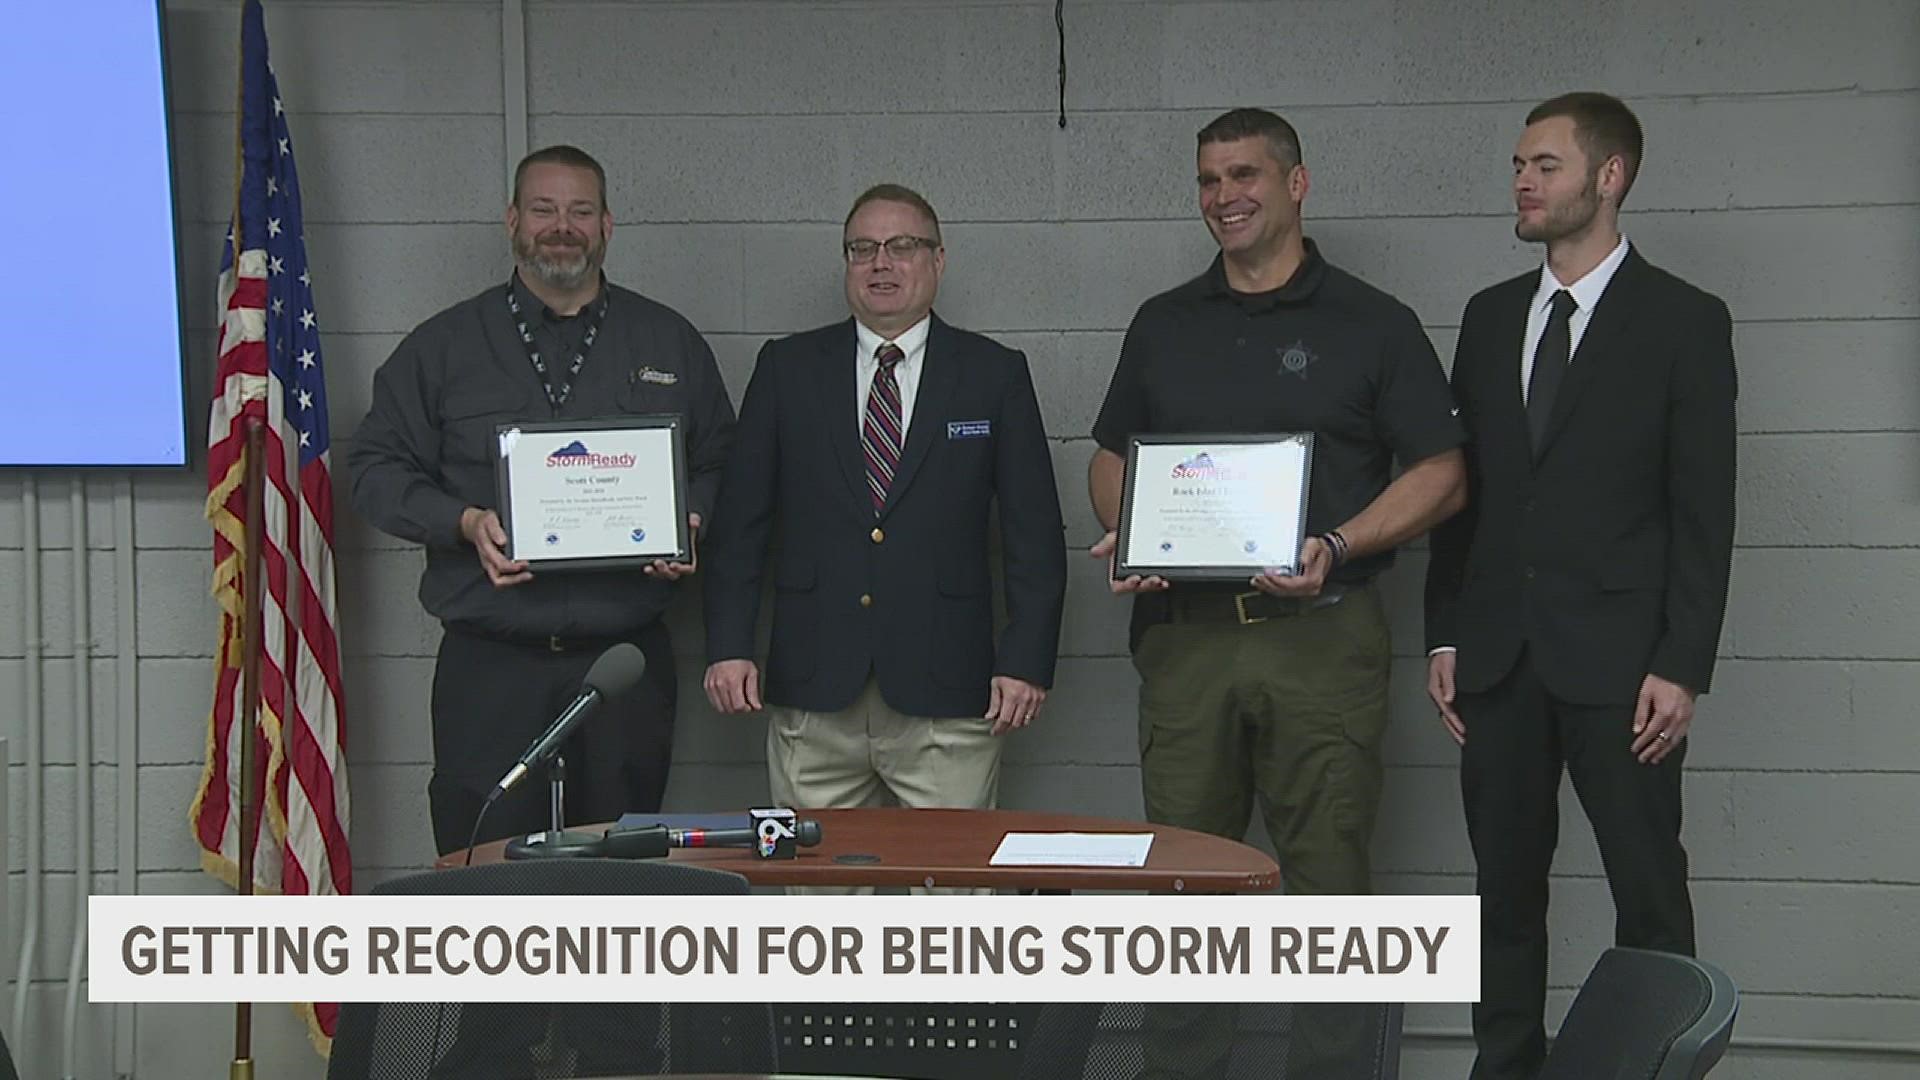 Scott and Rock Island counties officially are "StormReady" based on increased efforts in severe weather preparedness.